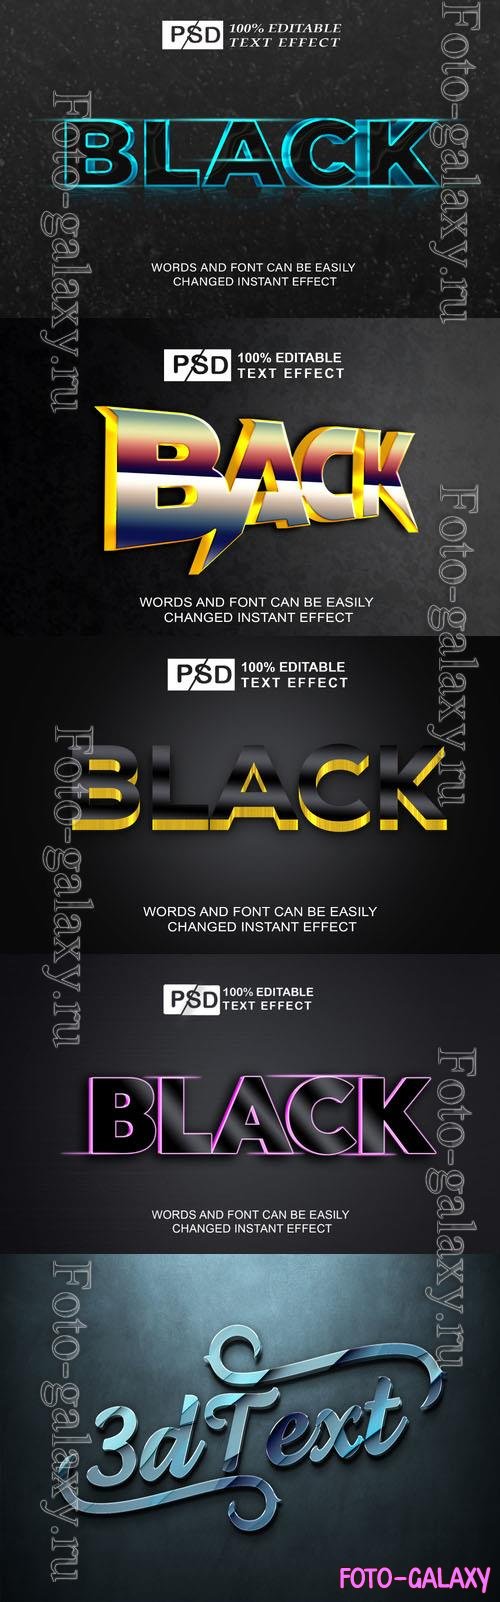 Psd style text effect editable collection vol 336 